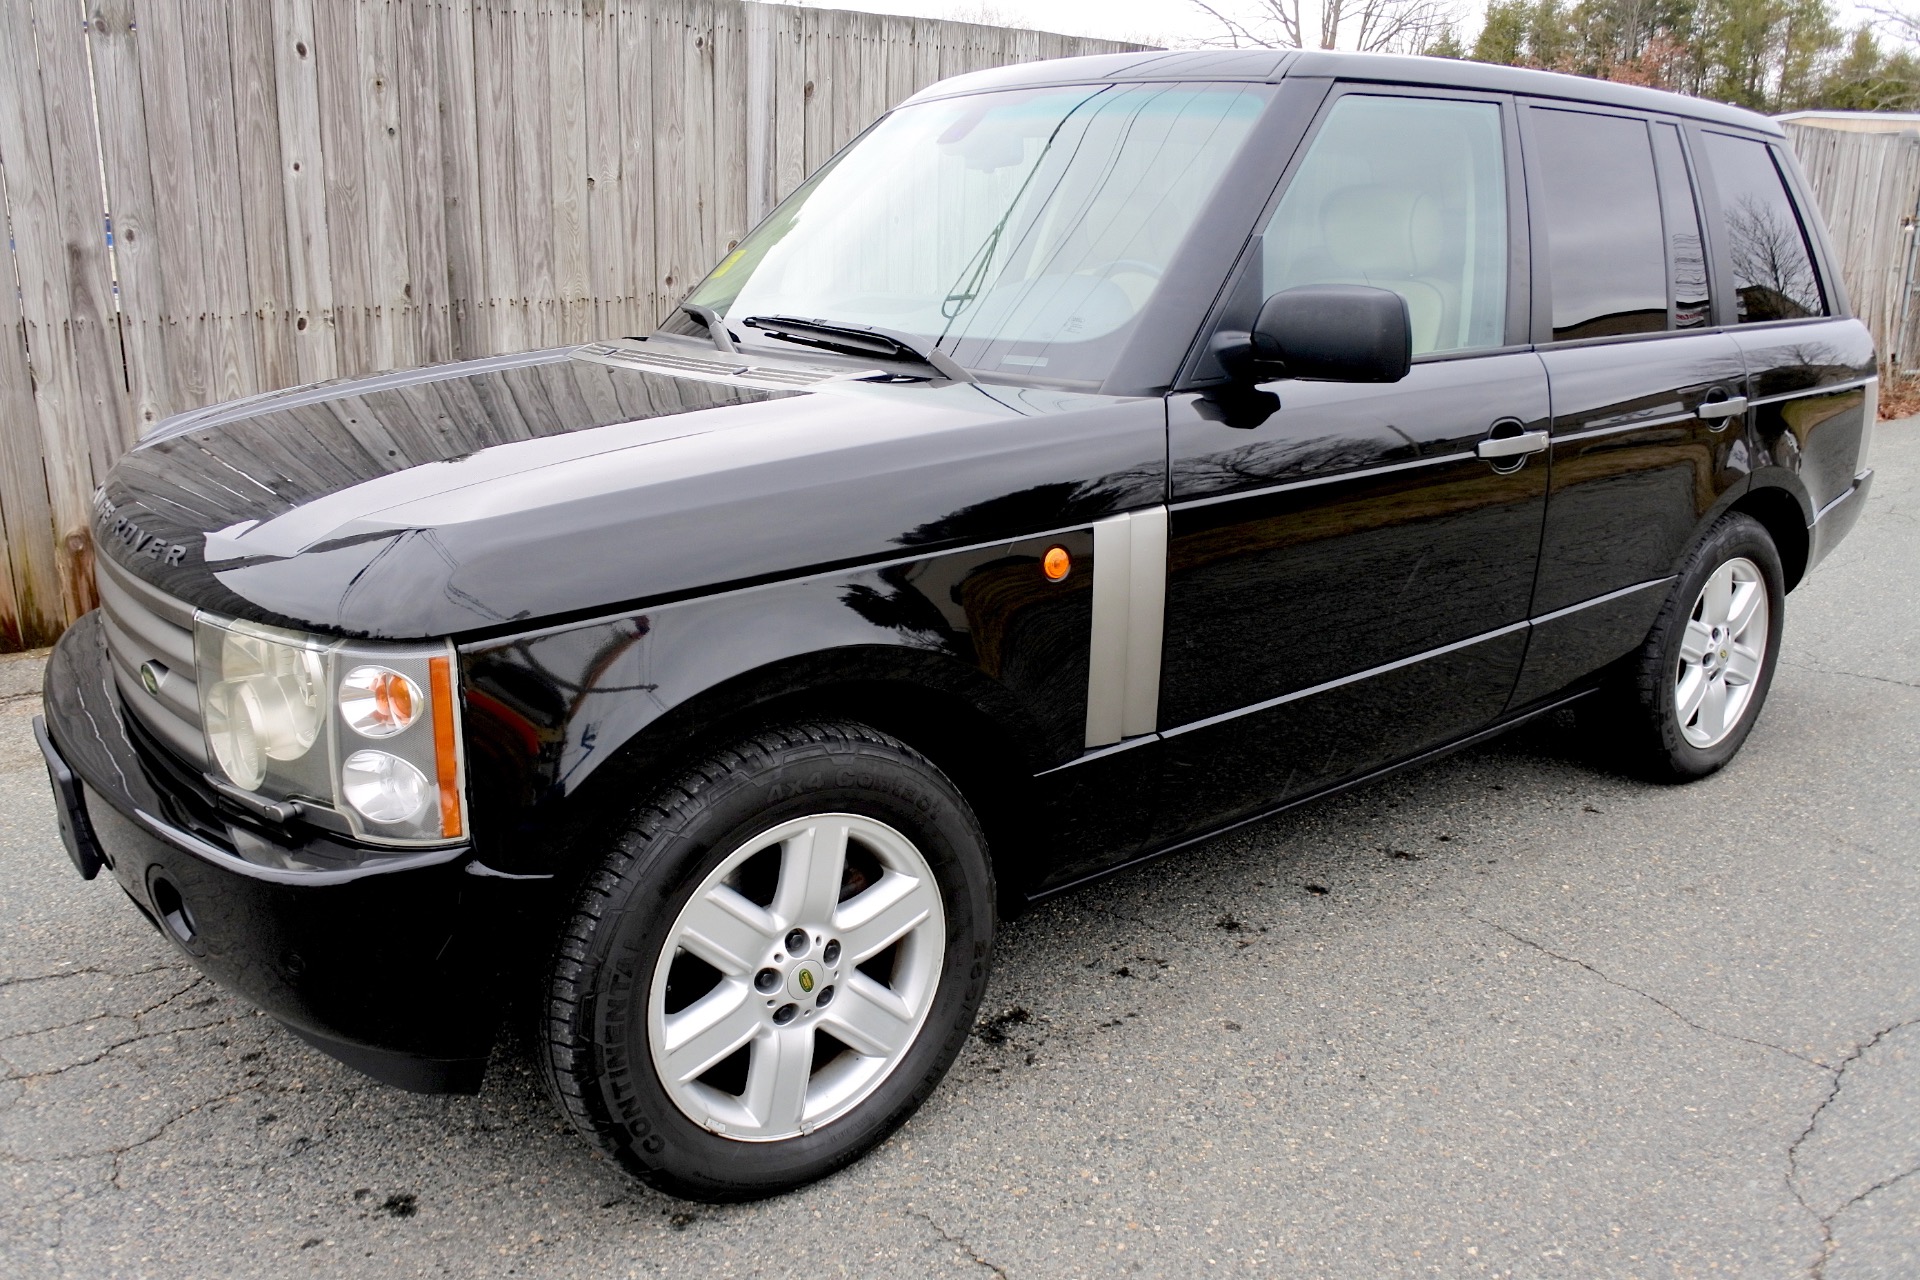 Used 2004 Land Rover Range Rover Hse For Sale 8 800 Metro West Motorcars Llc Stock 177311